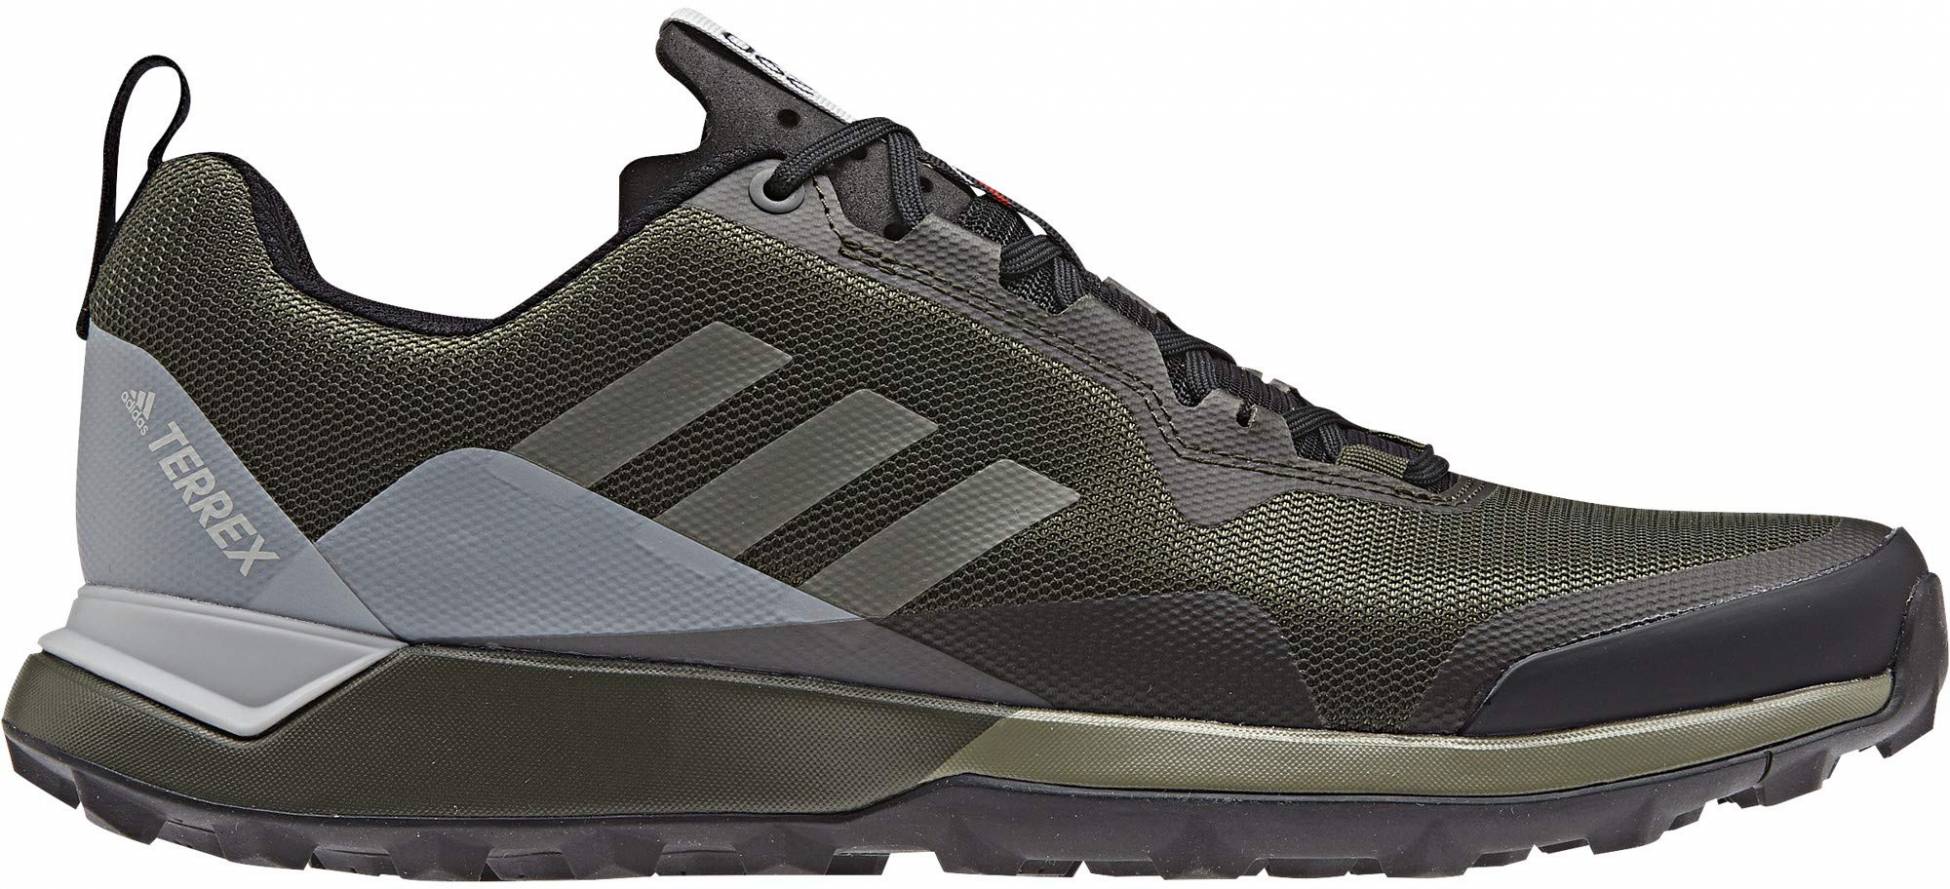 Only $48 + Review of Adidas Terrex CMTK 